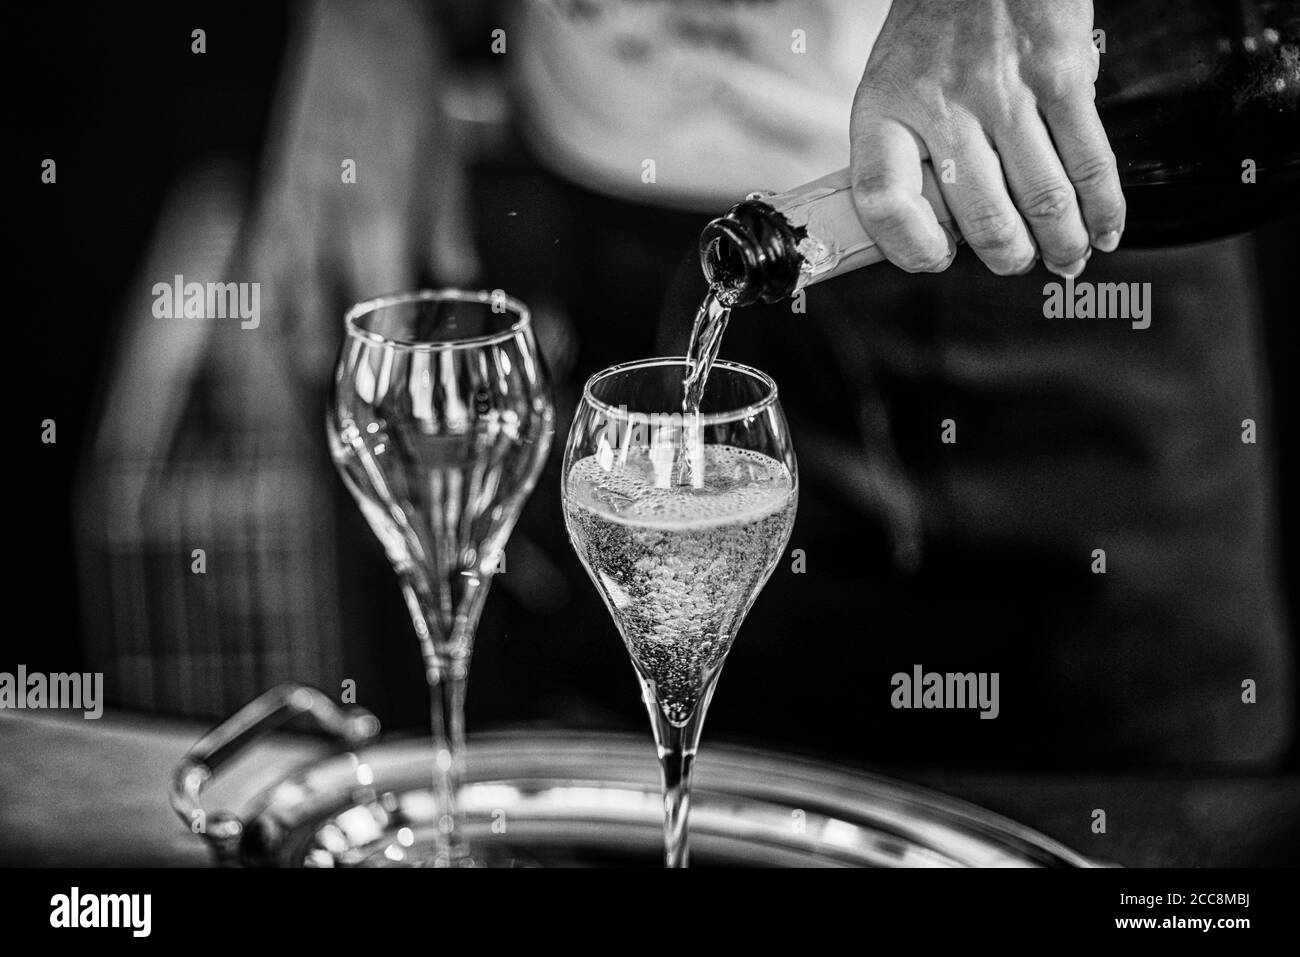 Woman bar tender hand seving sparkling white wine on two glasses for a toast Stock Photo